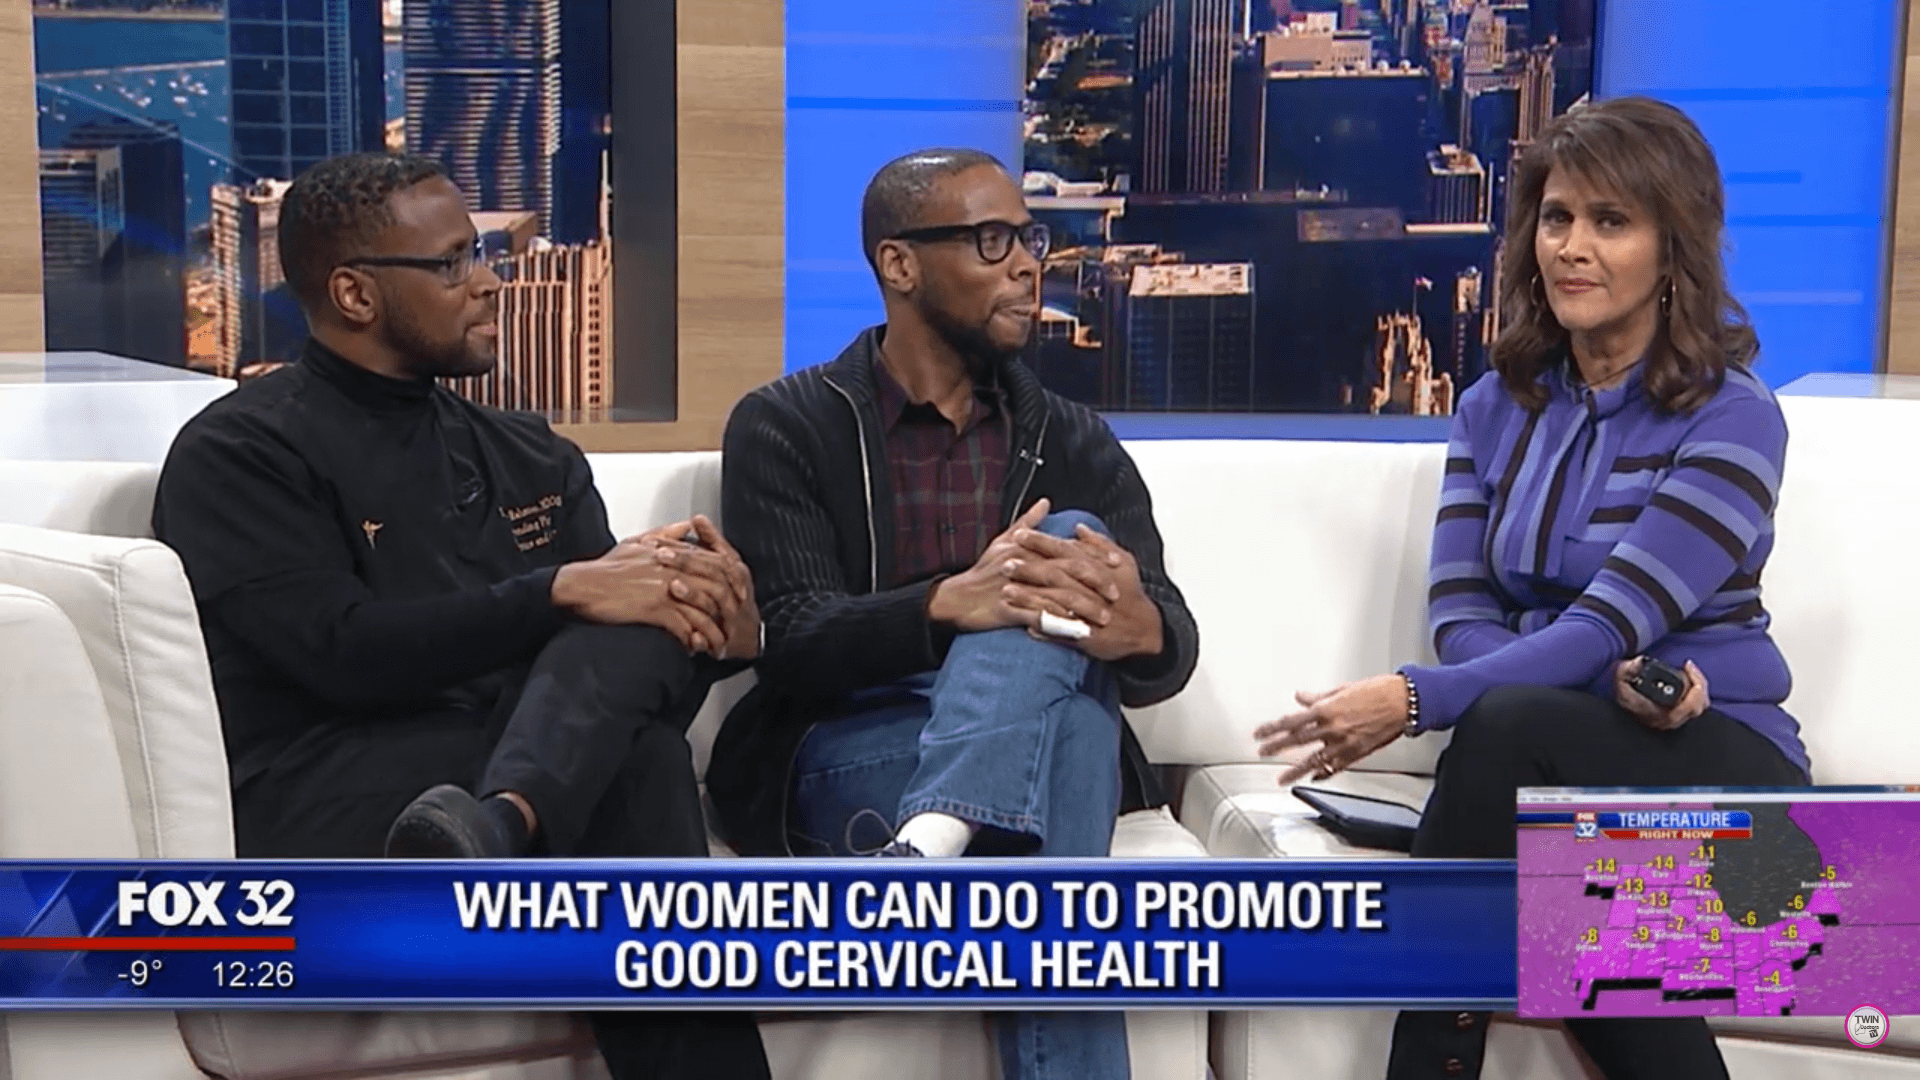 Cervical Health, What Is It and Why Does It Matter? Fox 32 Chicago News at Noon